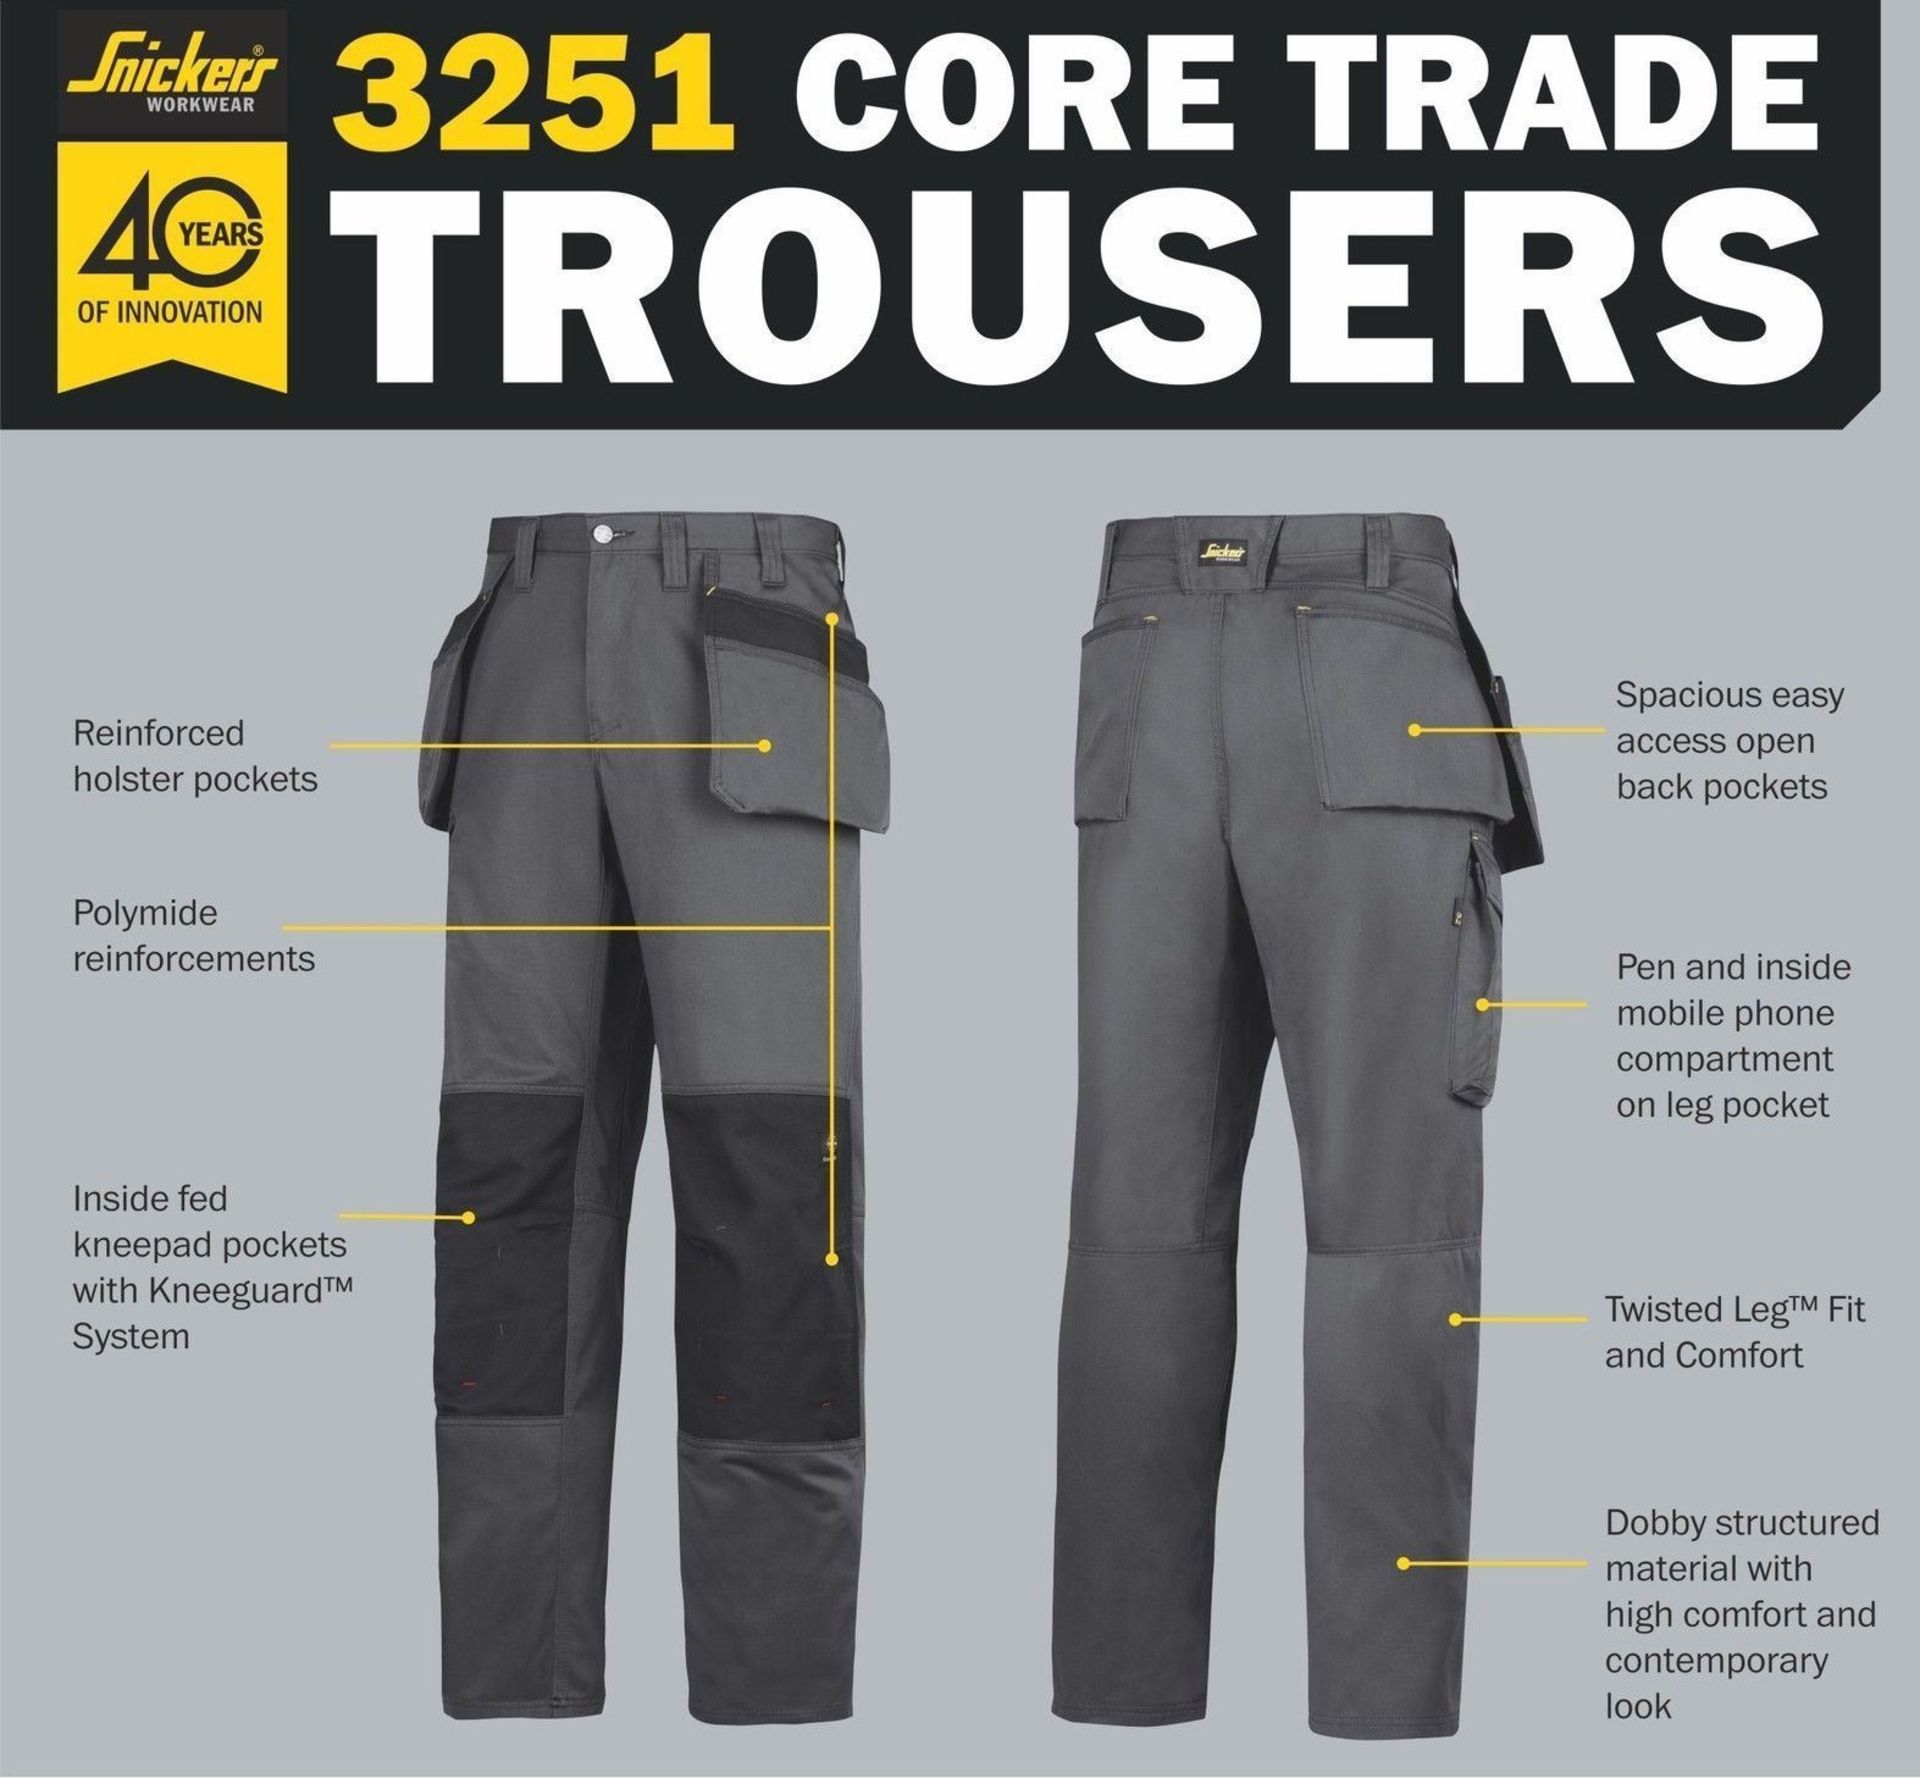 1 x Pair Of SNICKERS 3251 Core Trade Heavy Duty Trousers With Holster Pockets - Colour: Grey/Black - - Image 2 of 2